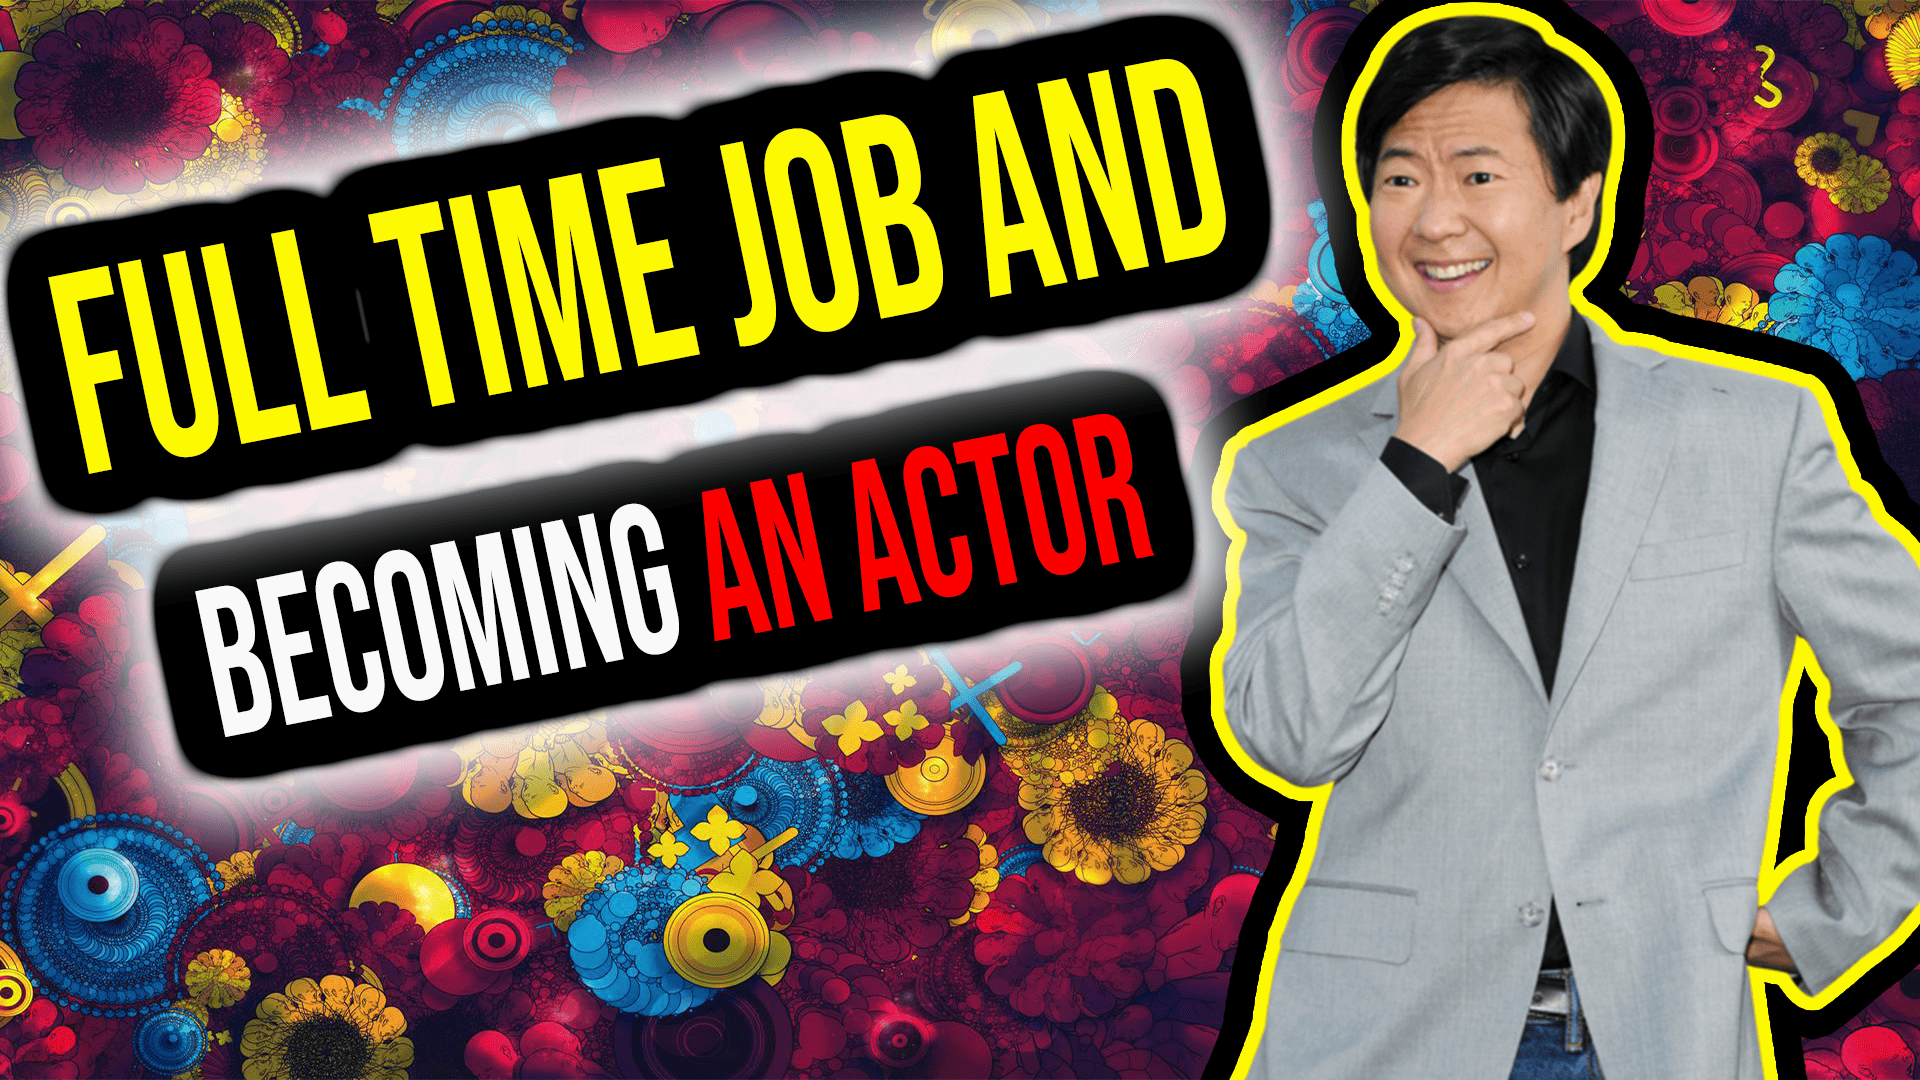 How To Be An Actor With A Full Time Job: The Ultimate Guide to Balancing It All